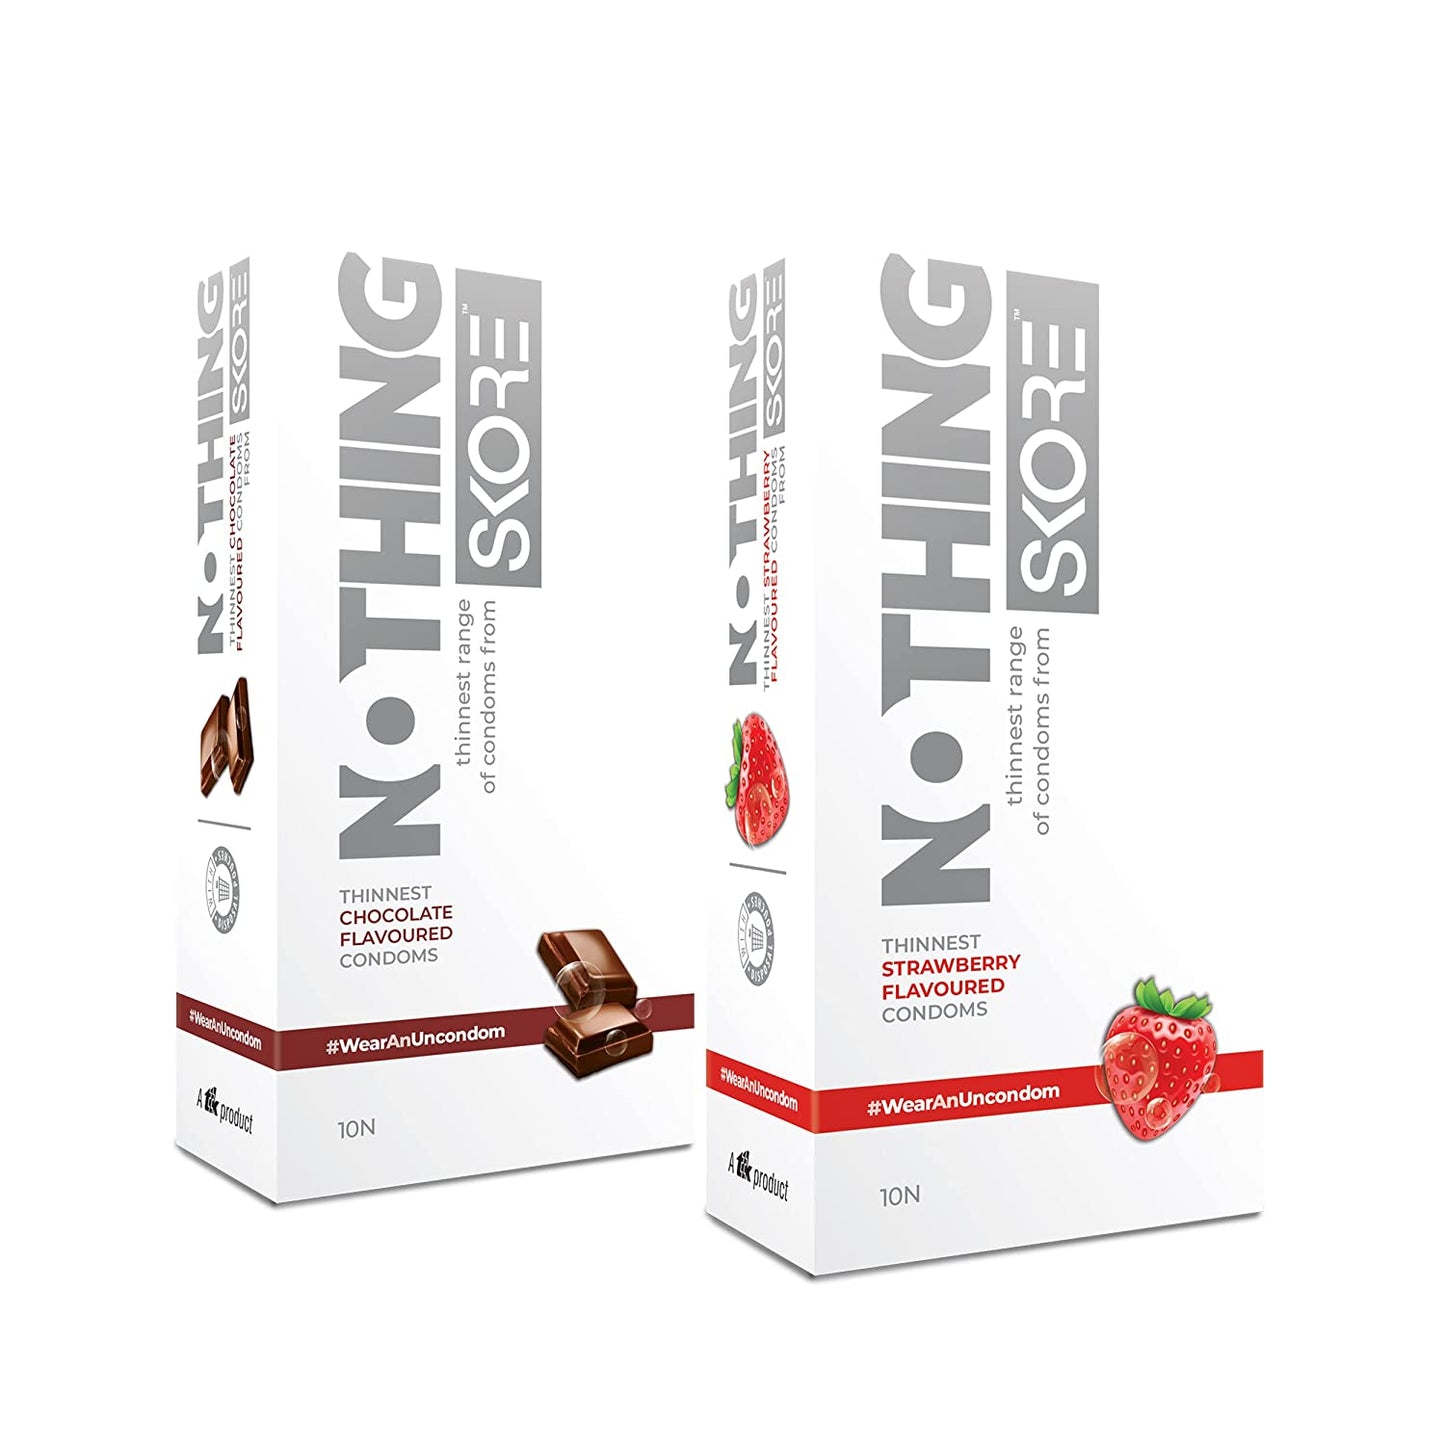 Skore Nothing Thinnest Pleasure Chocolate & Strawberry Flavored Condoms With Disposal Pouches, 10N Per Pack - Pack of 2